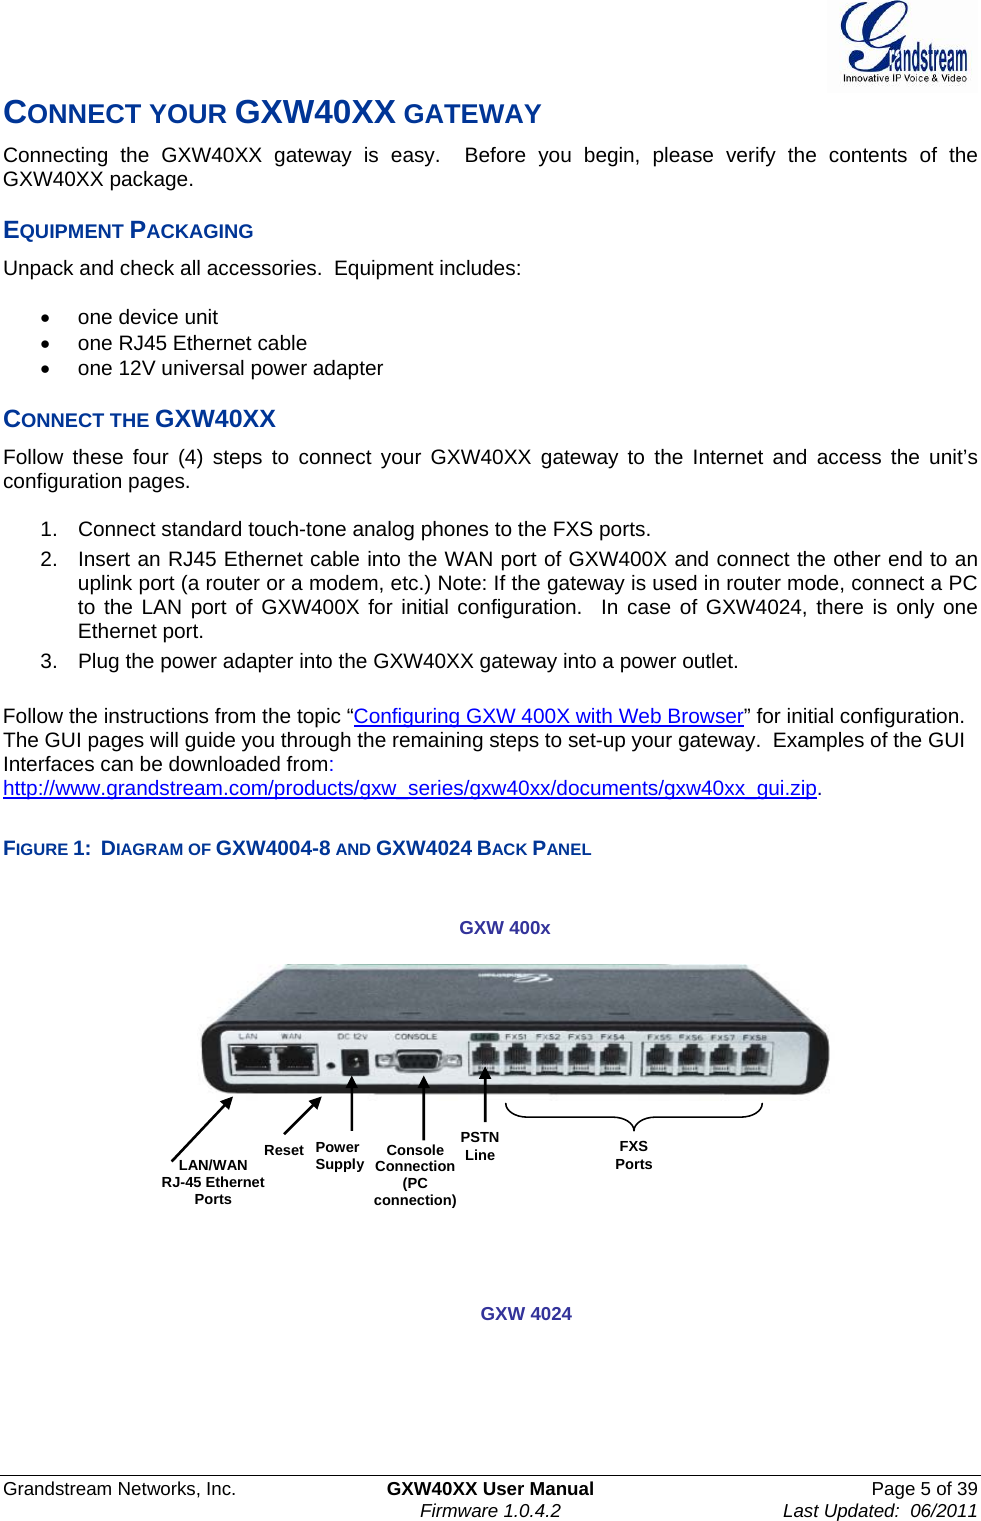  Grandstream Networks, Inc.  GXW40XX User Manual  Page 5 of 39    Firmware 1.0.4.2  Last Updated:  06/2011  CONNECT YOUR GXW40XX GATEWAY Connecting the GXW40XX gateway is easy.  Before you begin, please verify the contents of the GXW40XX package.  EQUIPMENT PACKAGING  Unpack and check all accessories.  Equipment includes:   •  one device unit •  one RJ45 Ethernet cable •  one 12V universal power adapter  CONNECT THE GXW40XX  Follow these four (4) steps to connect your GXW40XX gateway to the Internet and access the unit’s configuration pages.  1.  Connect standard touch-tone analog phones to the FXS ports. 2.  Insert an RJ45 Ethernet cable into the WAN port of GXW400X and connect the other end to an uplink port (a router or a modem, etc.) Note: If the gateway is used in router mode, connect a PC to the LAN port of GXW400X for initial configuration.  In case of GXW4024, there is only one Ethernet port.  3.  Plug the power adapter into the GXW40XX gateway into a power outlet.  Follow the instructions from the topic “Configuring GXW 400X with Web Browser” for initial configuration. The GUI pages will guide you through the remaining steps to set-up your gateway.  Examples of the GUI Interfaces can be downloaded from:  http://www.grandstream.com/products/gxw_series/gxw40xx/documents/gxw40xx_gui.zip.  FIGURE 1:  DIAGRAM OF GXW4004-8 AND GXW4024 BACK PANEL         LAN/WAN  RJ-45 Ethernet Ports FXS Ports Console Connection  (PC connection) GXW 400x  PSTN Line Power Supply Reset GXW 4024